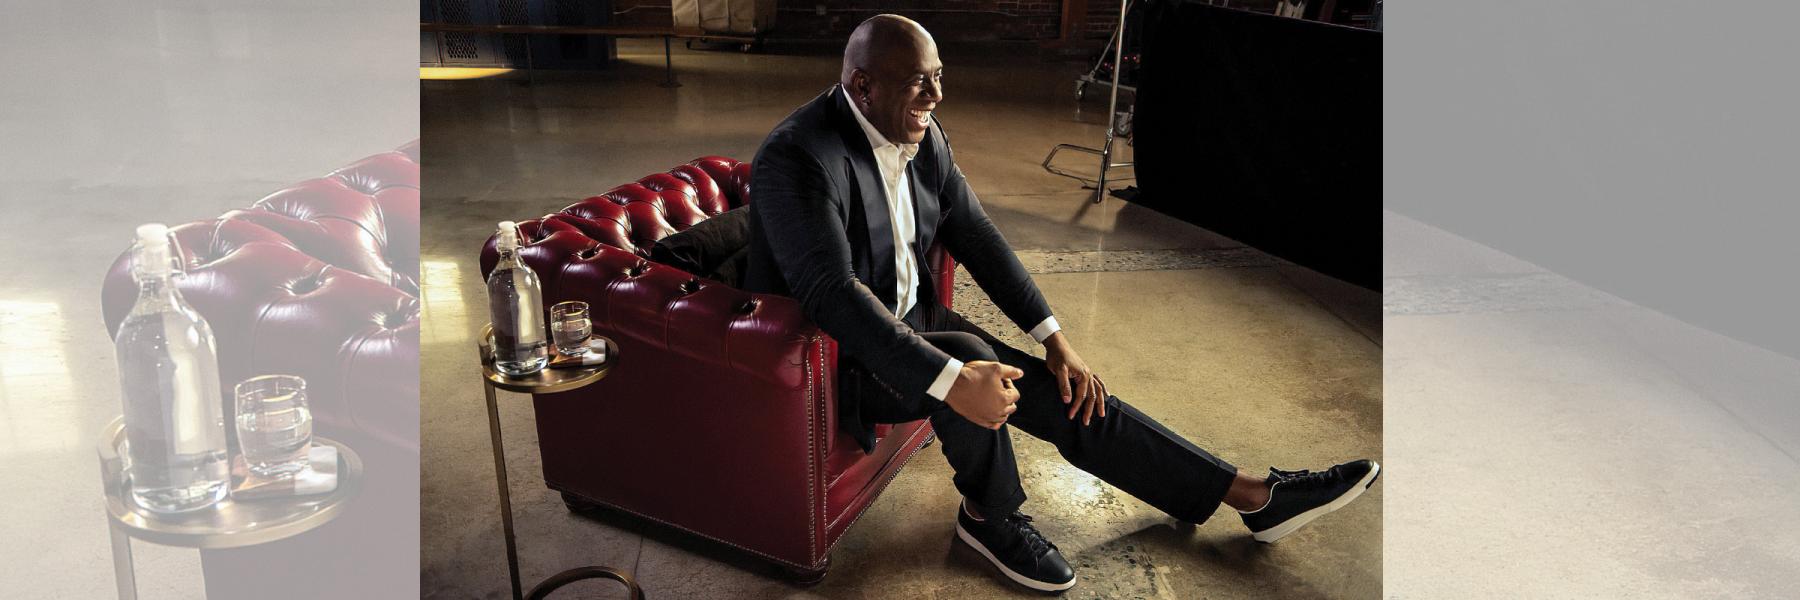 Magic Johnson seated in chair for interview